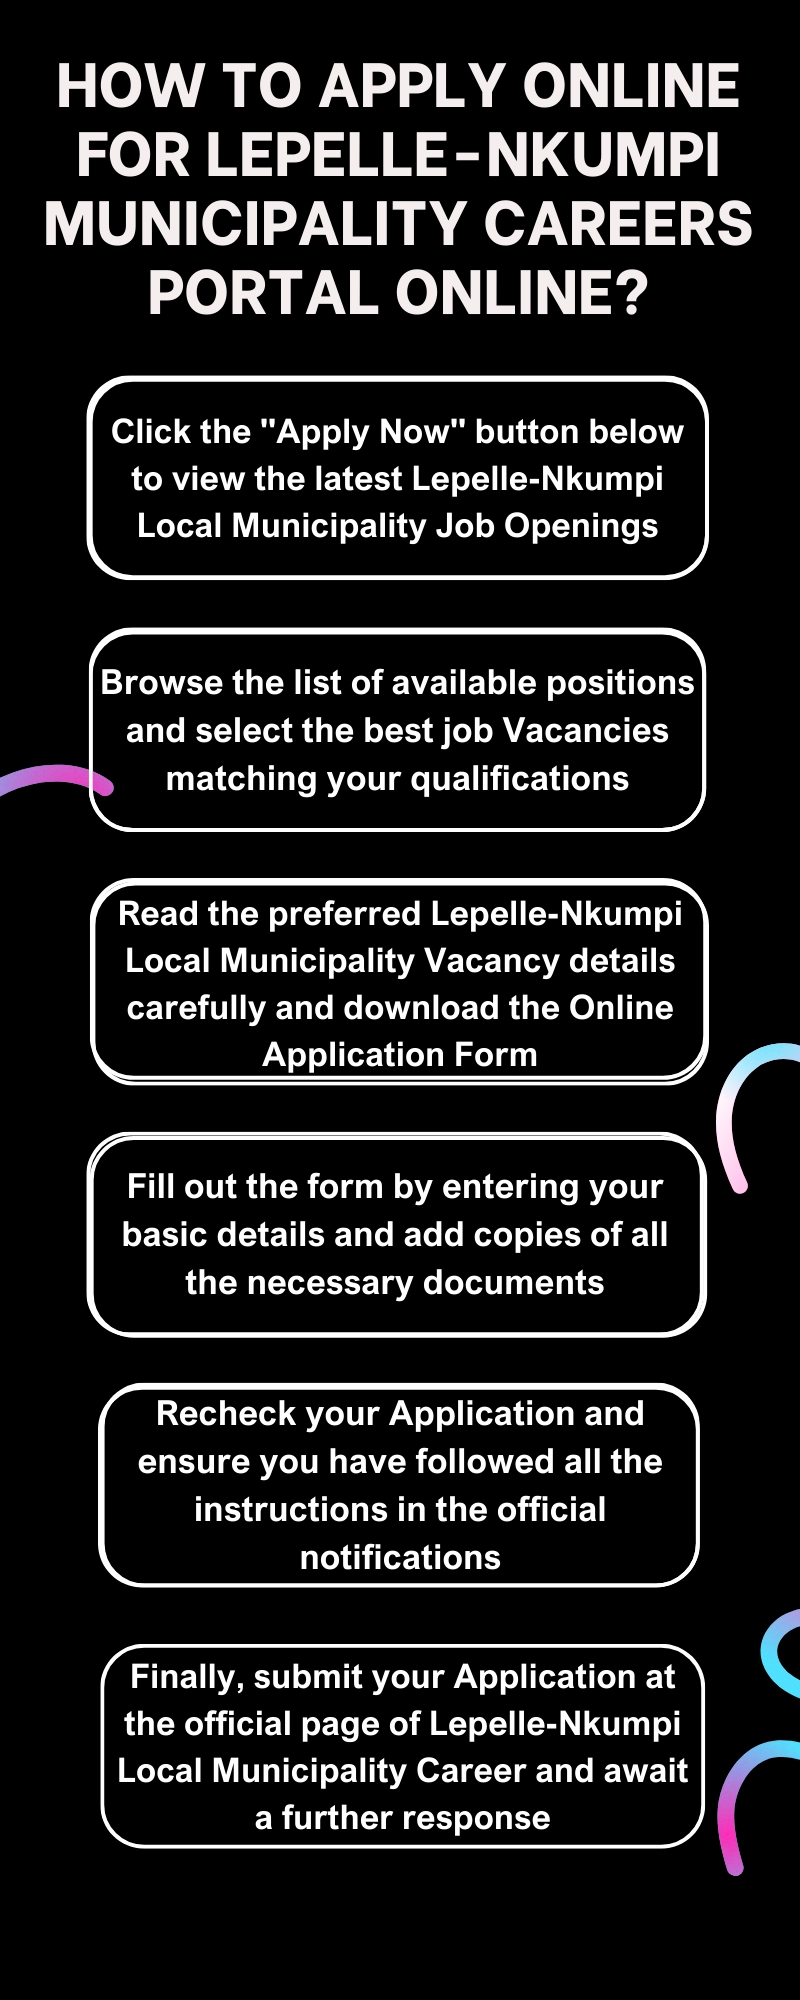 How to Apply online for Lepelle-Nkumpi Municipality Careers Portal Online?